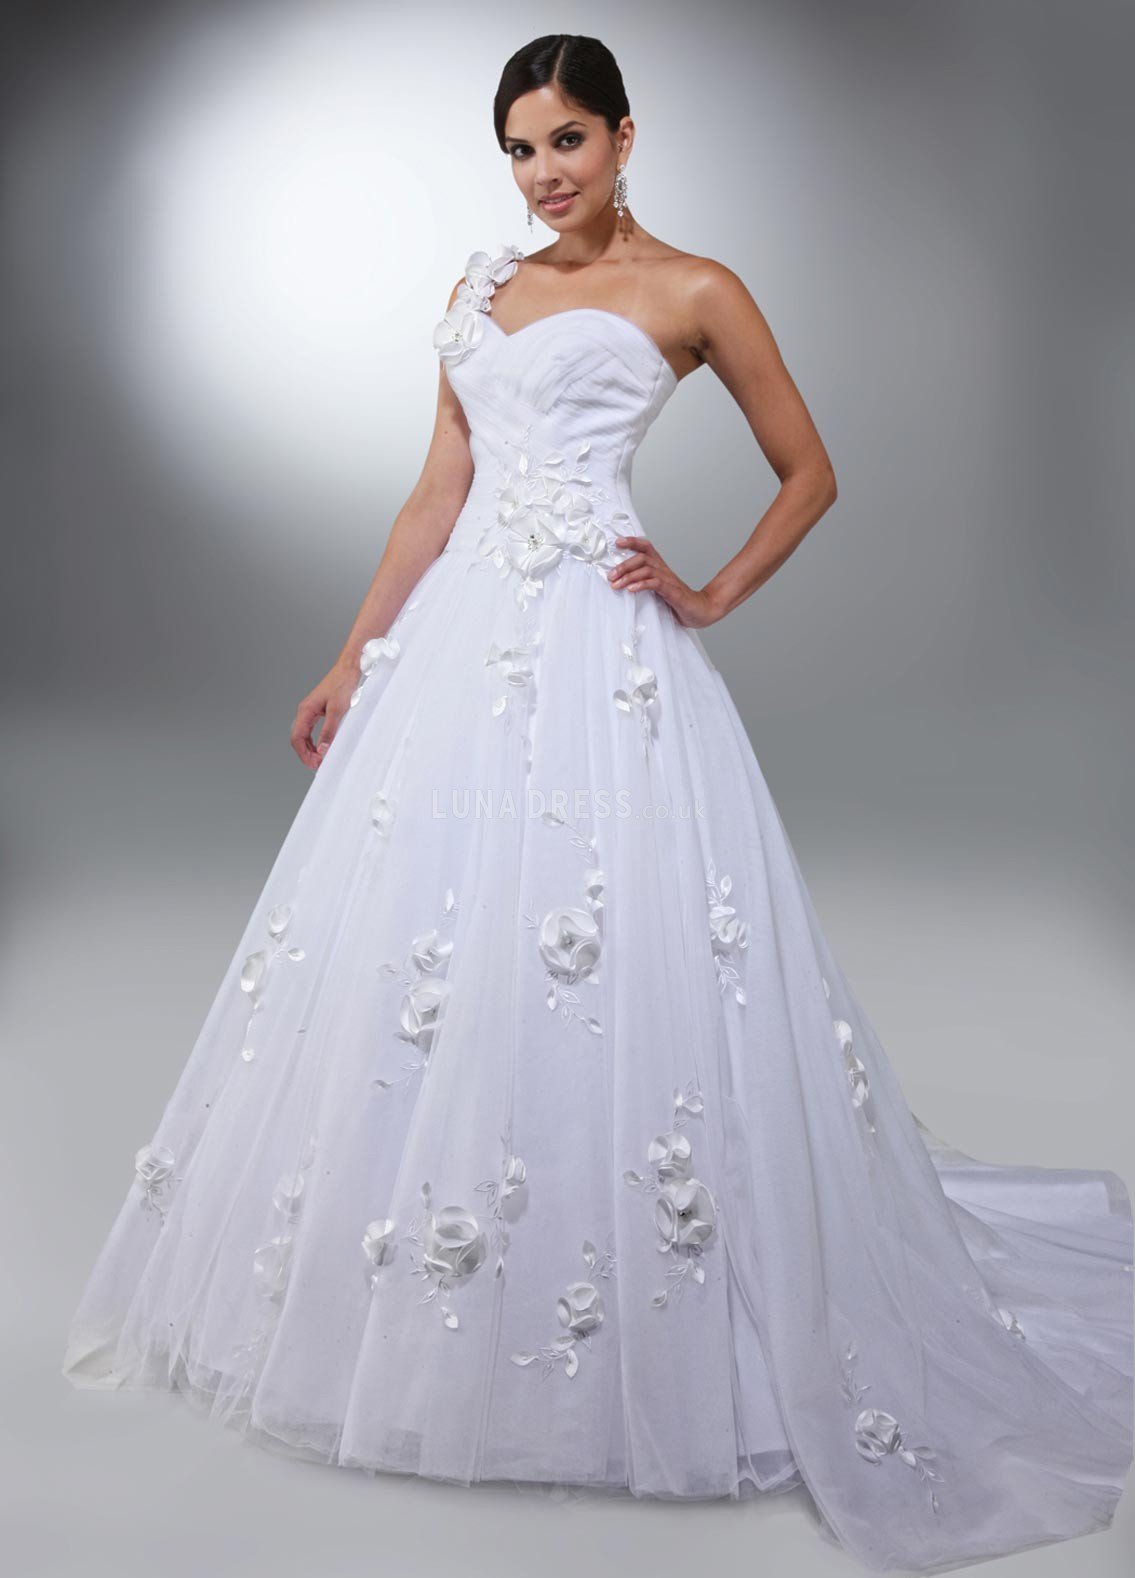 Amazing Custom Wedding Dress of the decade Check it out now 